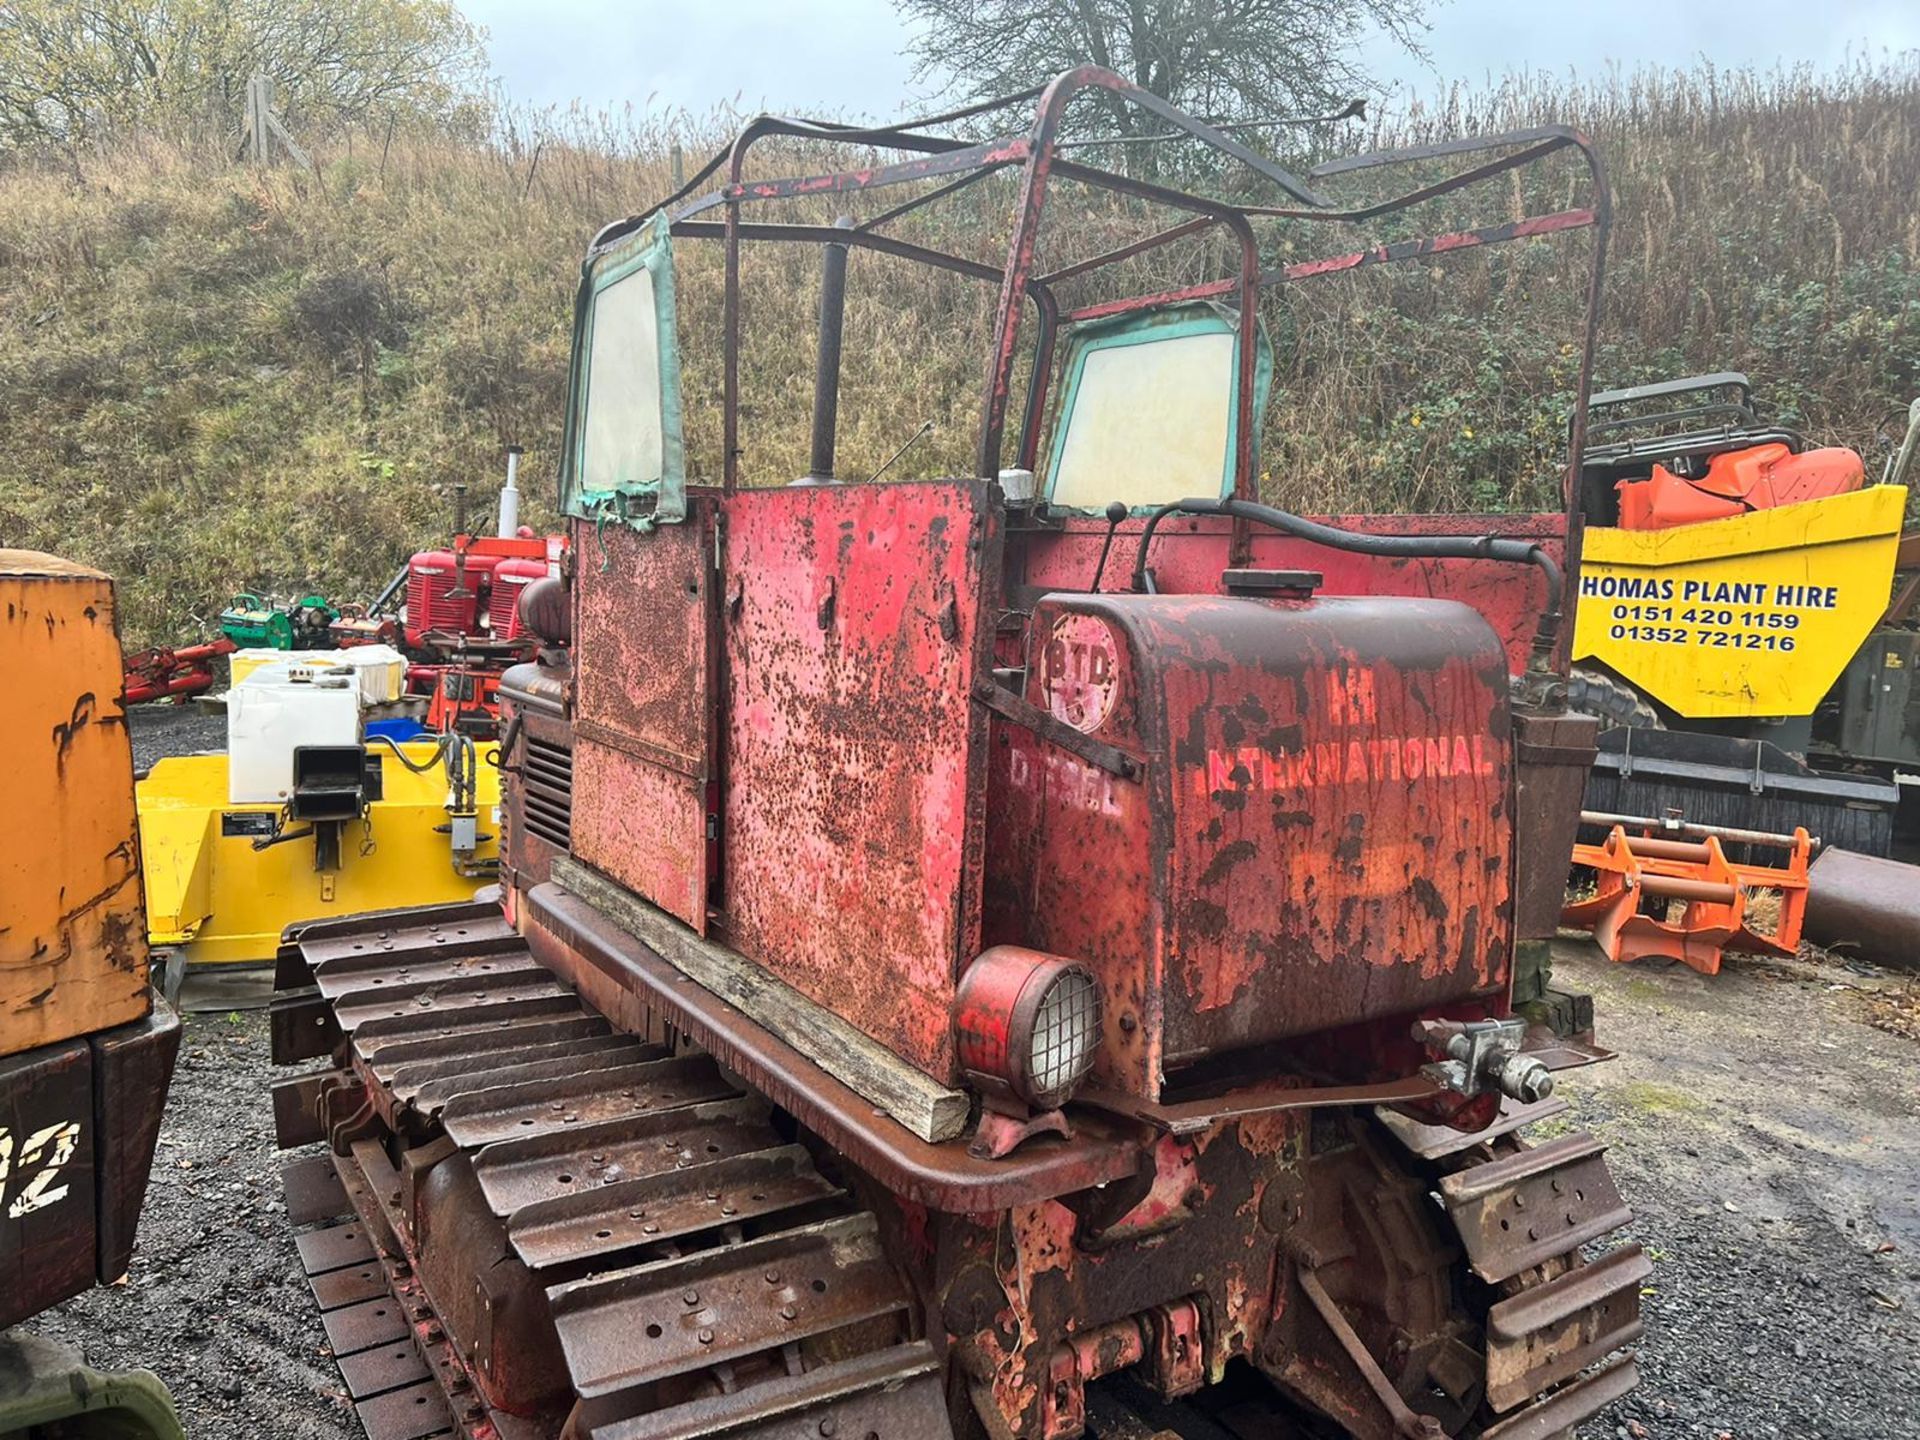 1955 INTERNATIONAL BTD6 39hp DIESEL TRACKED CRAWLER TRACTOR, RUNS AND DRIVES *PLUS VAT* - Image 3 of 11